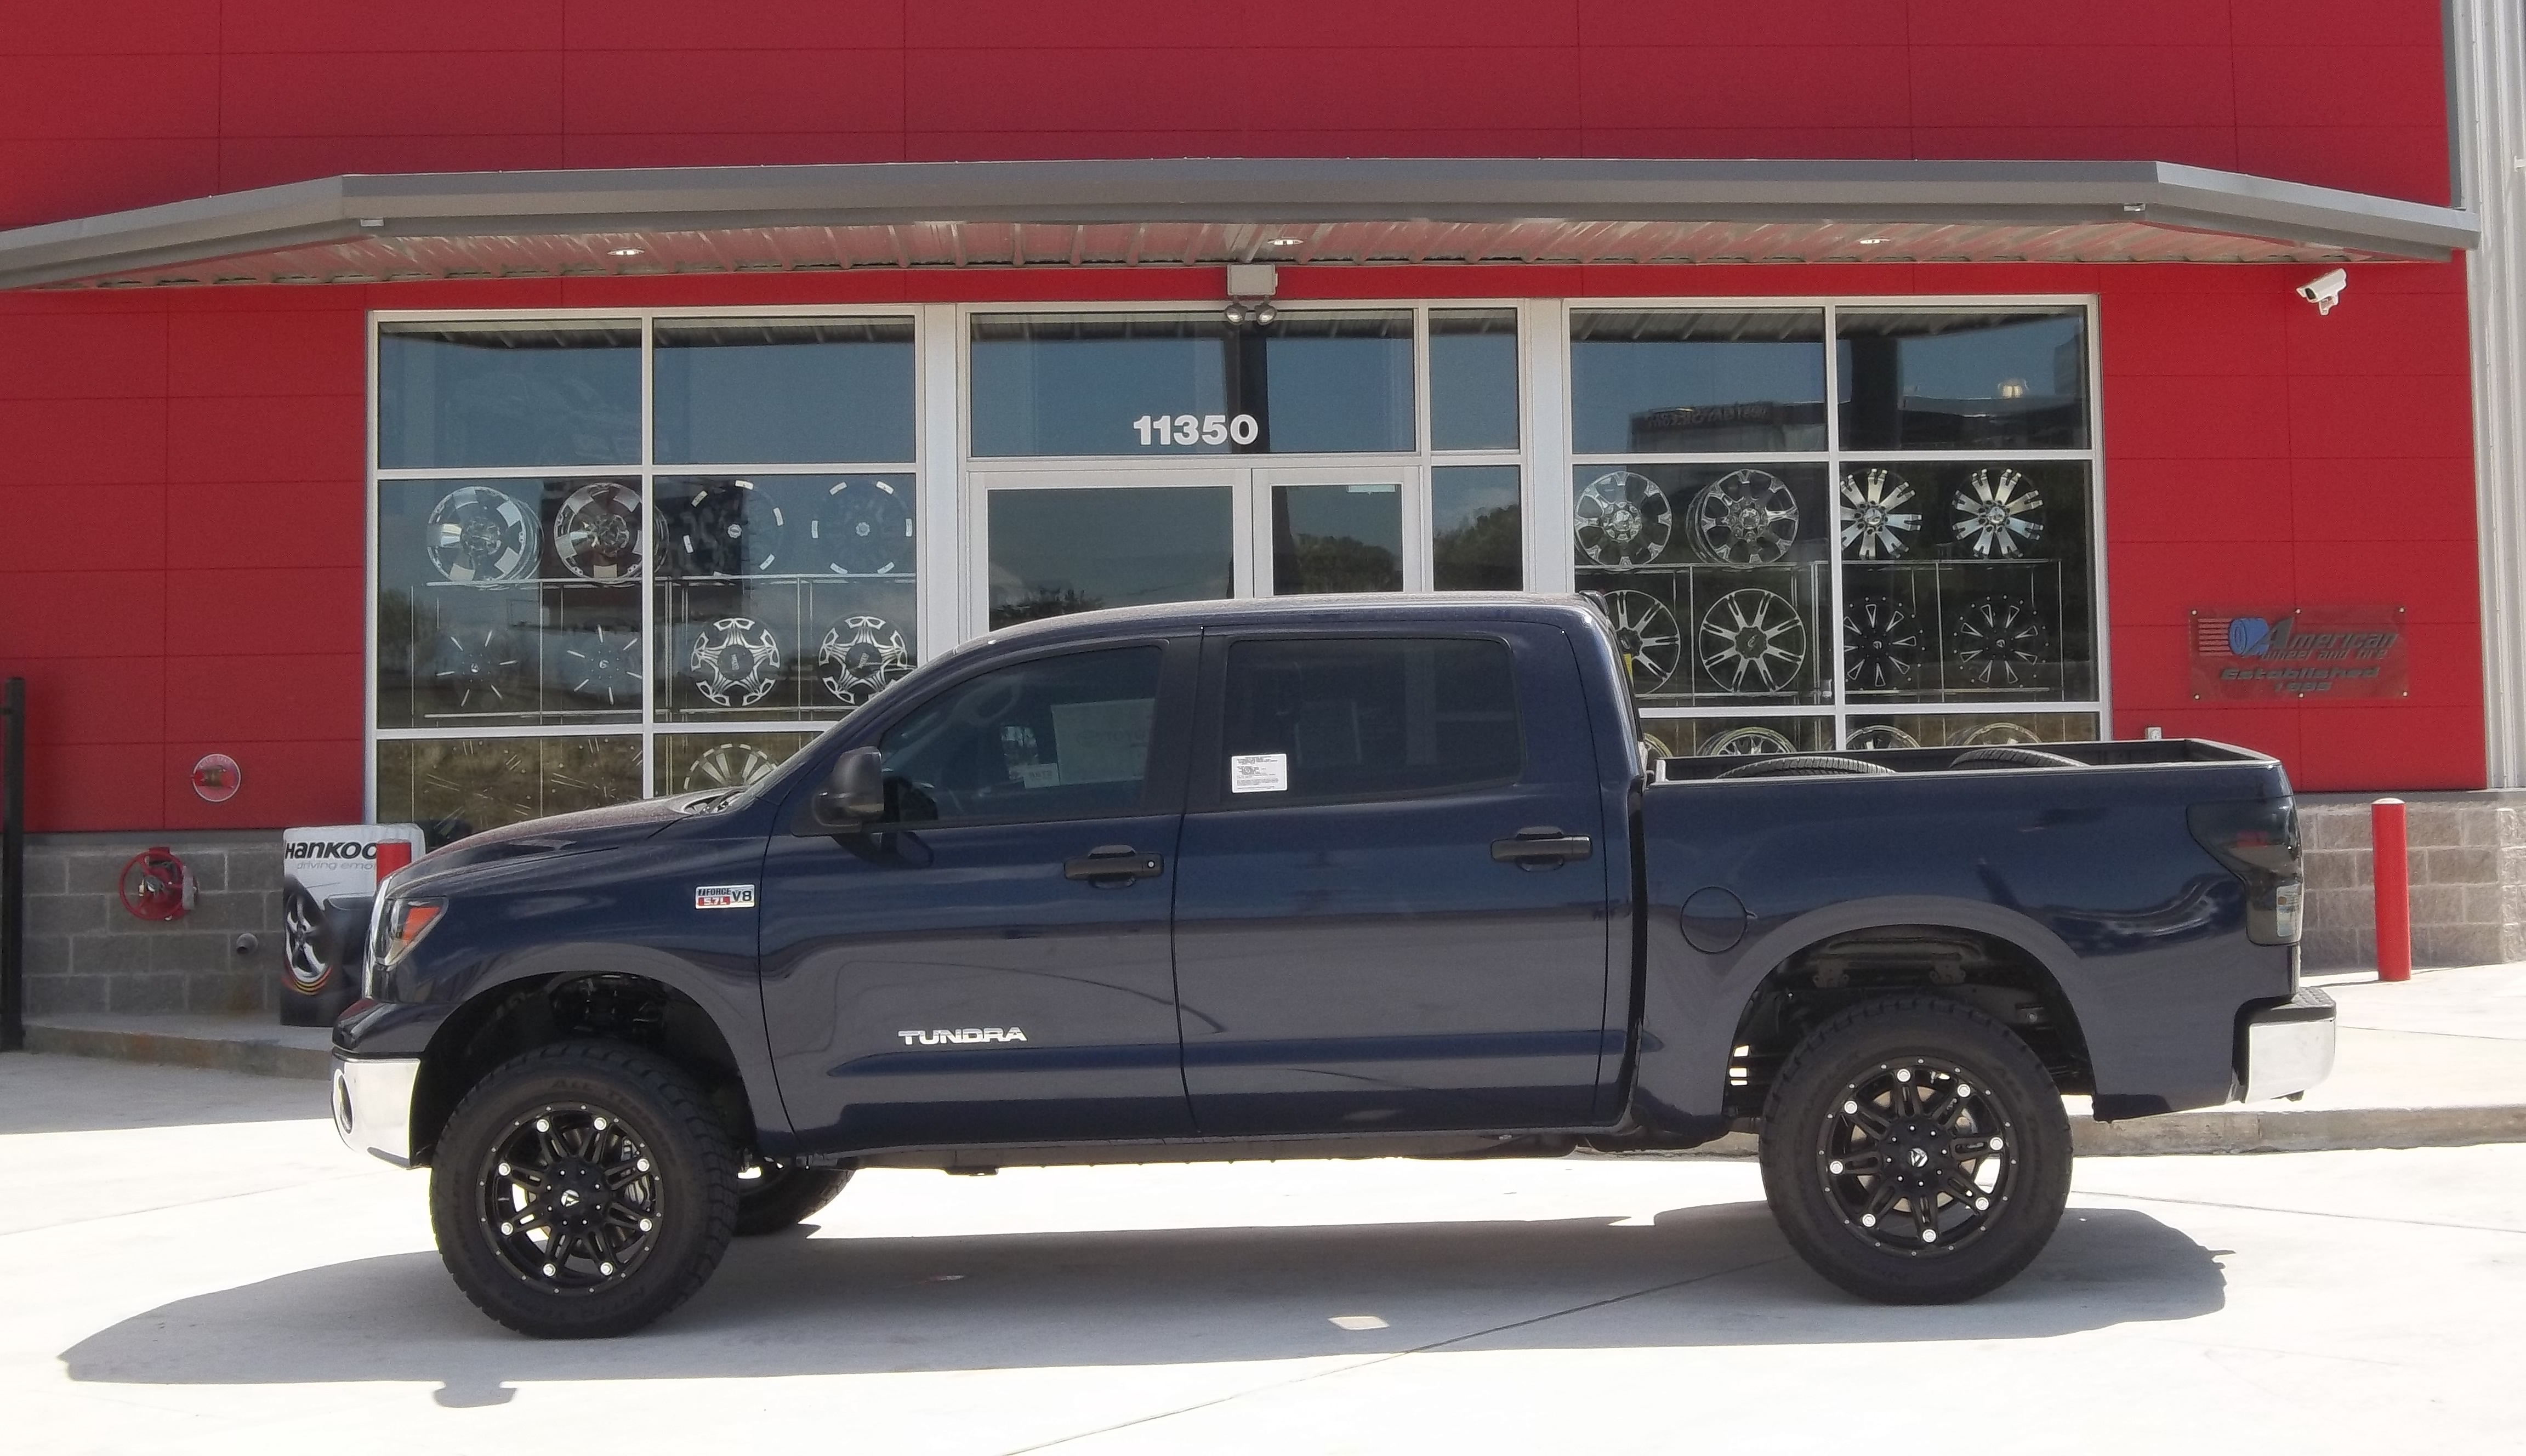 20 inch Fuel Hostage rims in a 2012 4Ã—4 Toyota Tundra with 305 55R20 Nitto